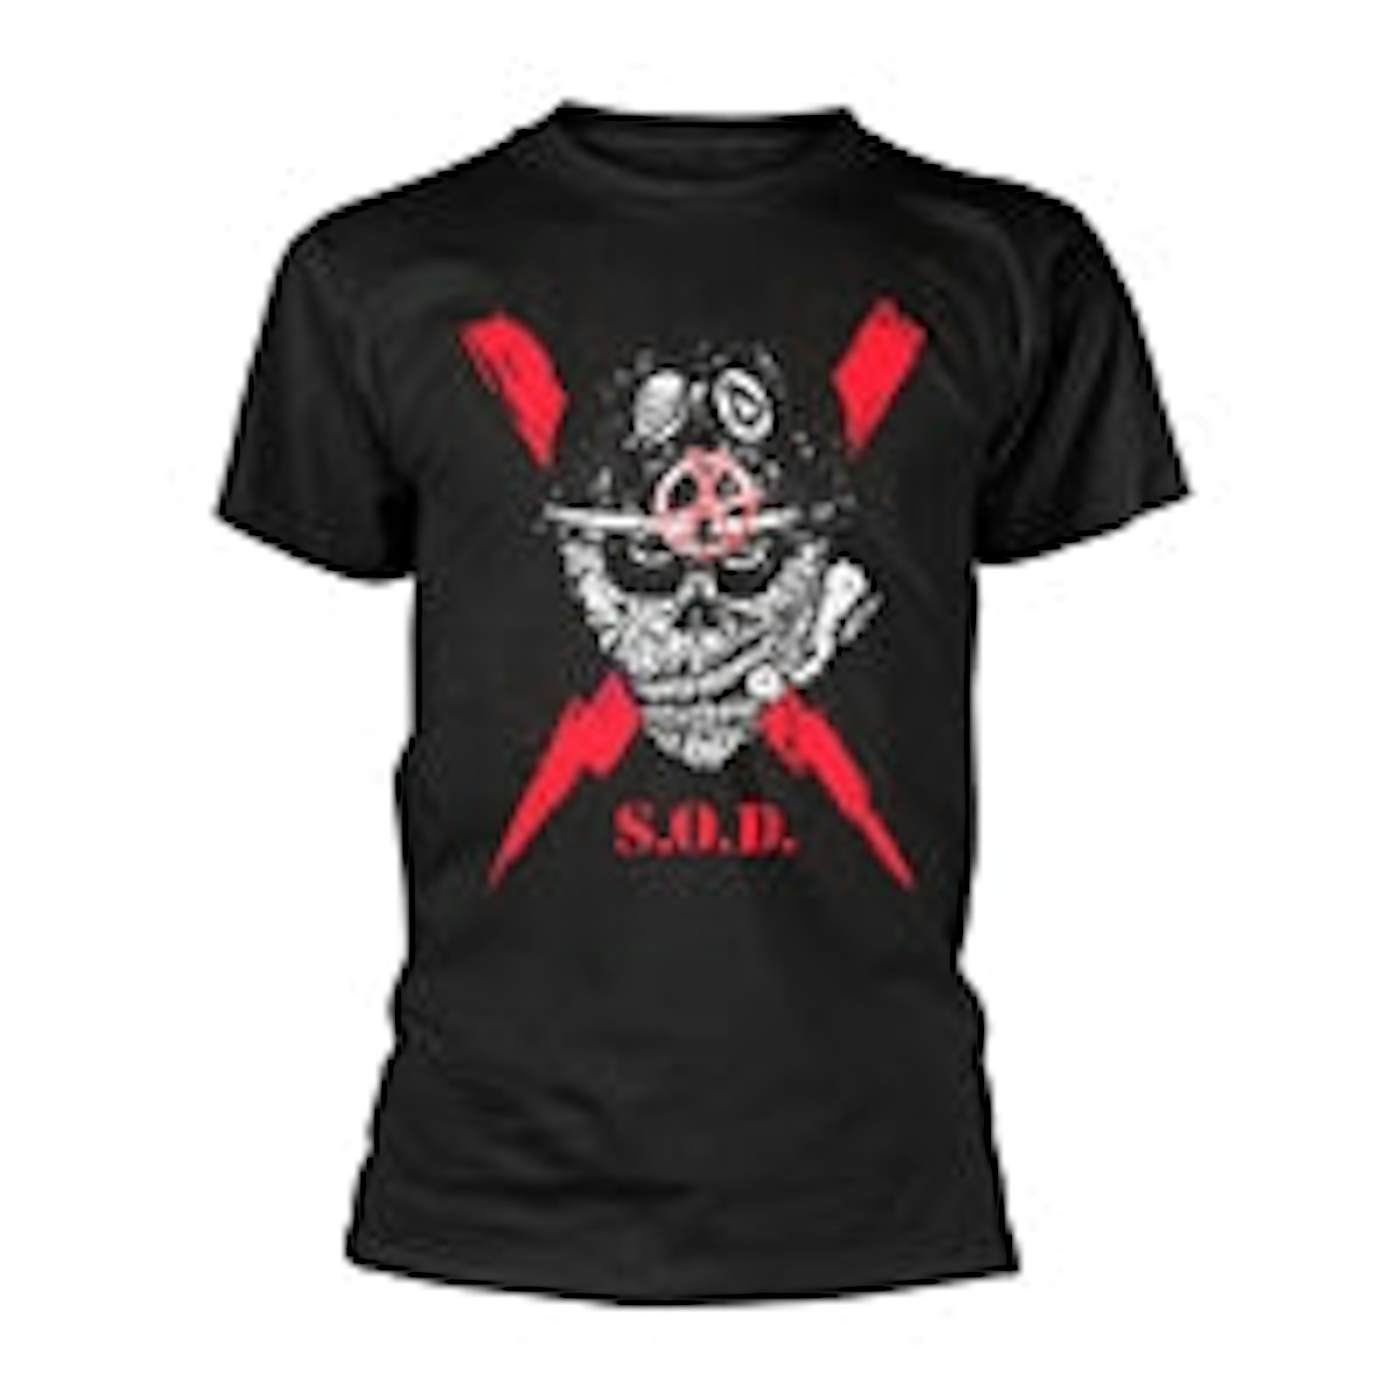 S.O.D. (Stormtroopers Of Death) T Shirt - Scrawled Lightning